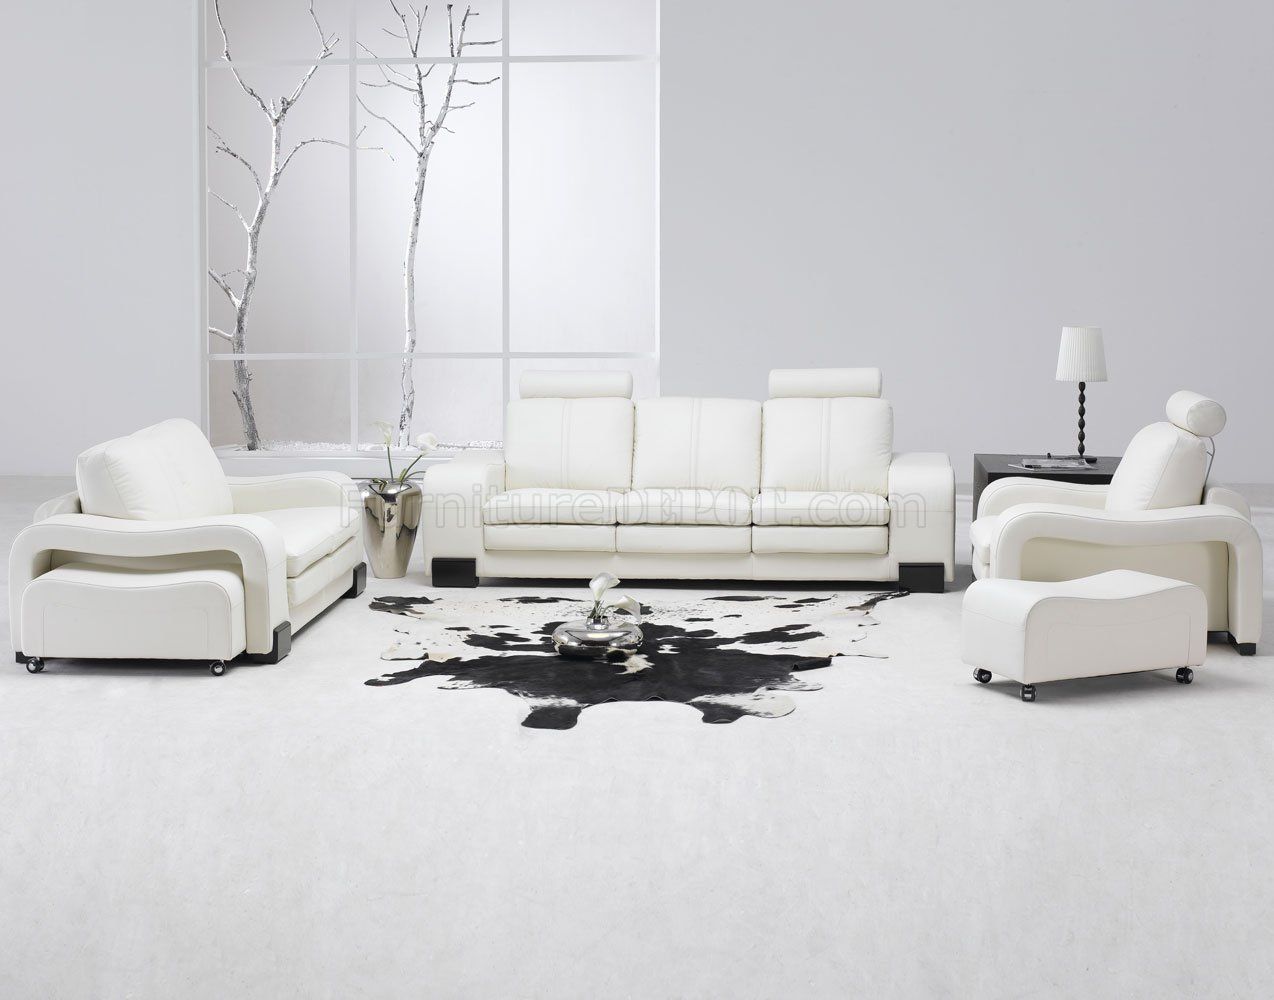 White Leather 4pc Modern Sofa, Loveseat, Chair & Couch Inside 4pc Beckett Contemporary Sectional Sofas And Ottoman Sets (Photo 9 of 15)